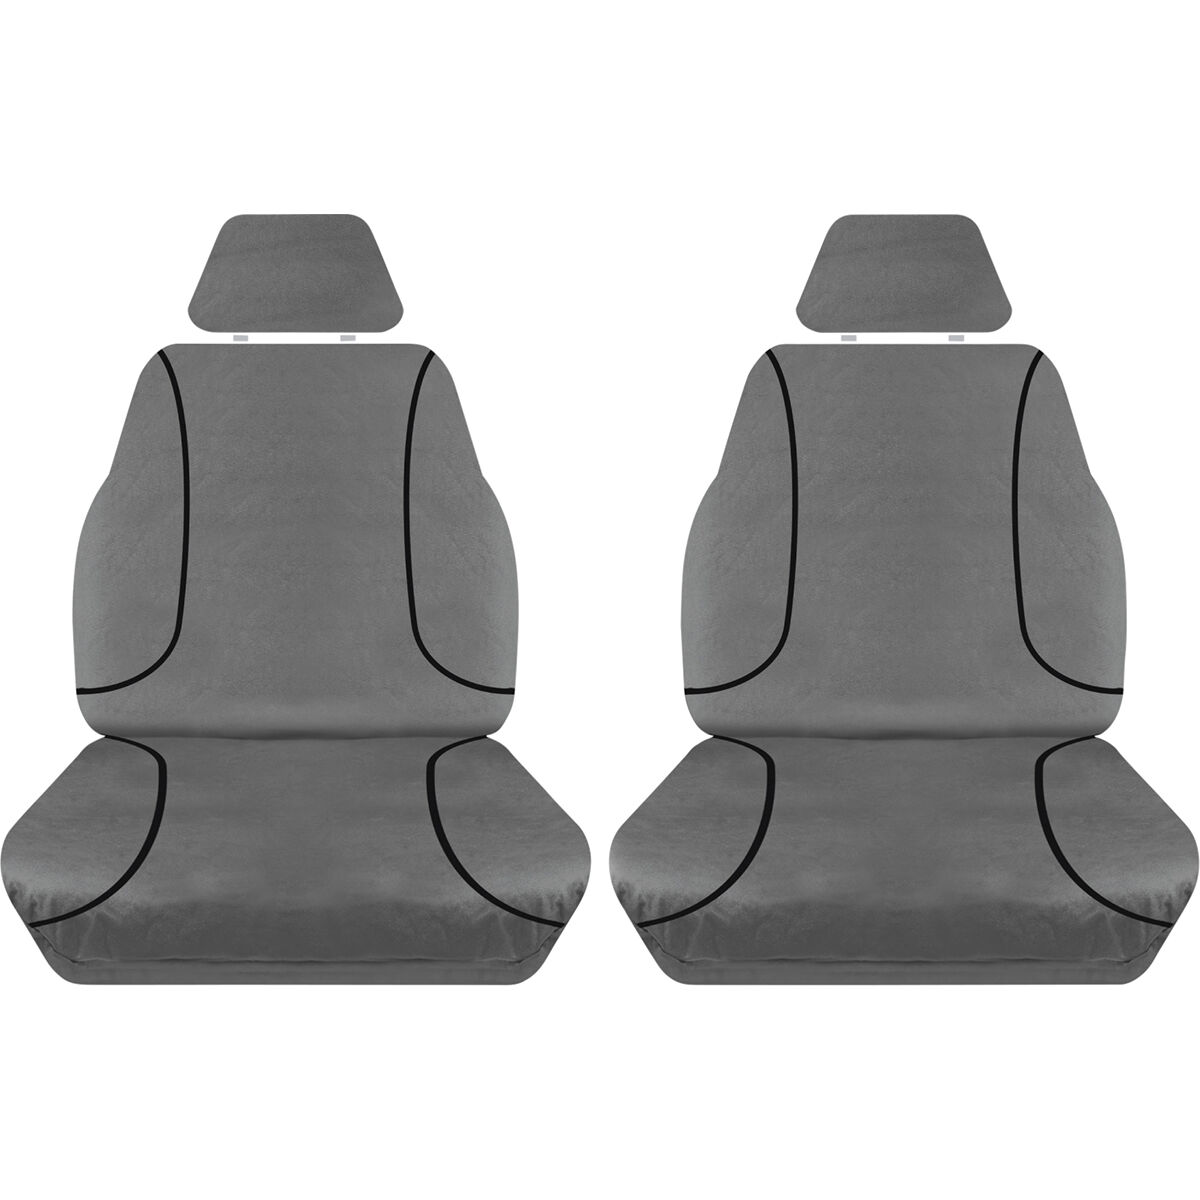 Tradies Canvas Ready Made Seat Covers Front Pair Grey suits Triton, , scaau_hi-res